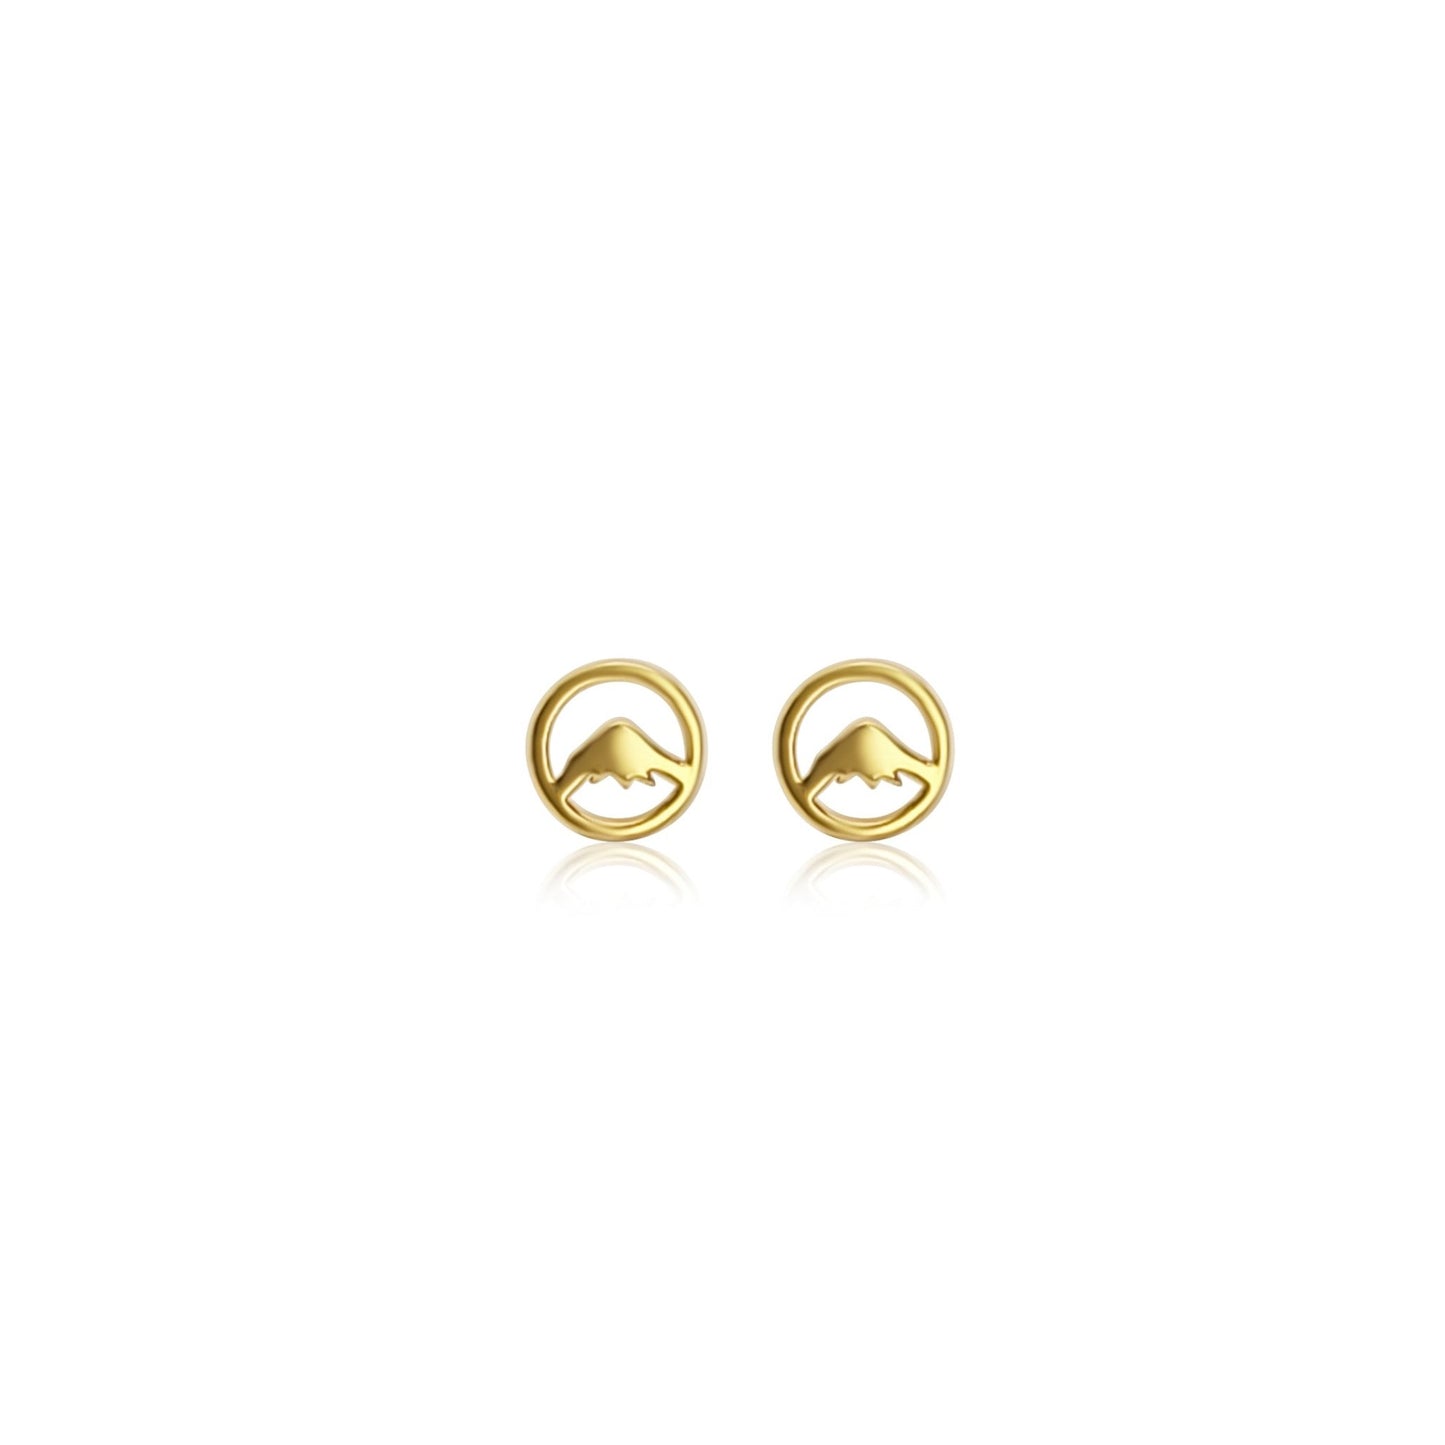 Beaumont gold plated silver stud earrings with small circle mountain charm